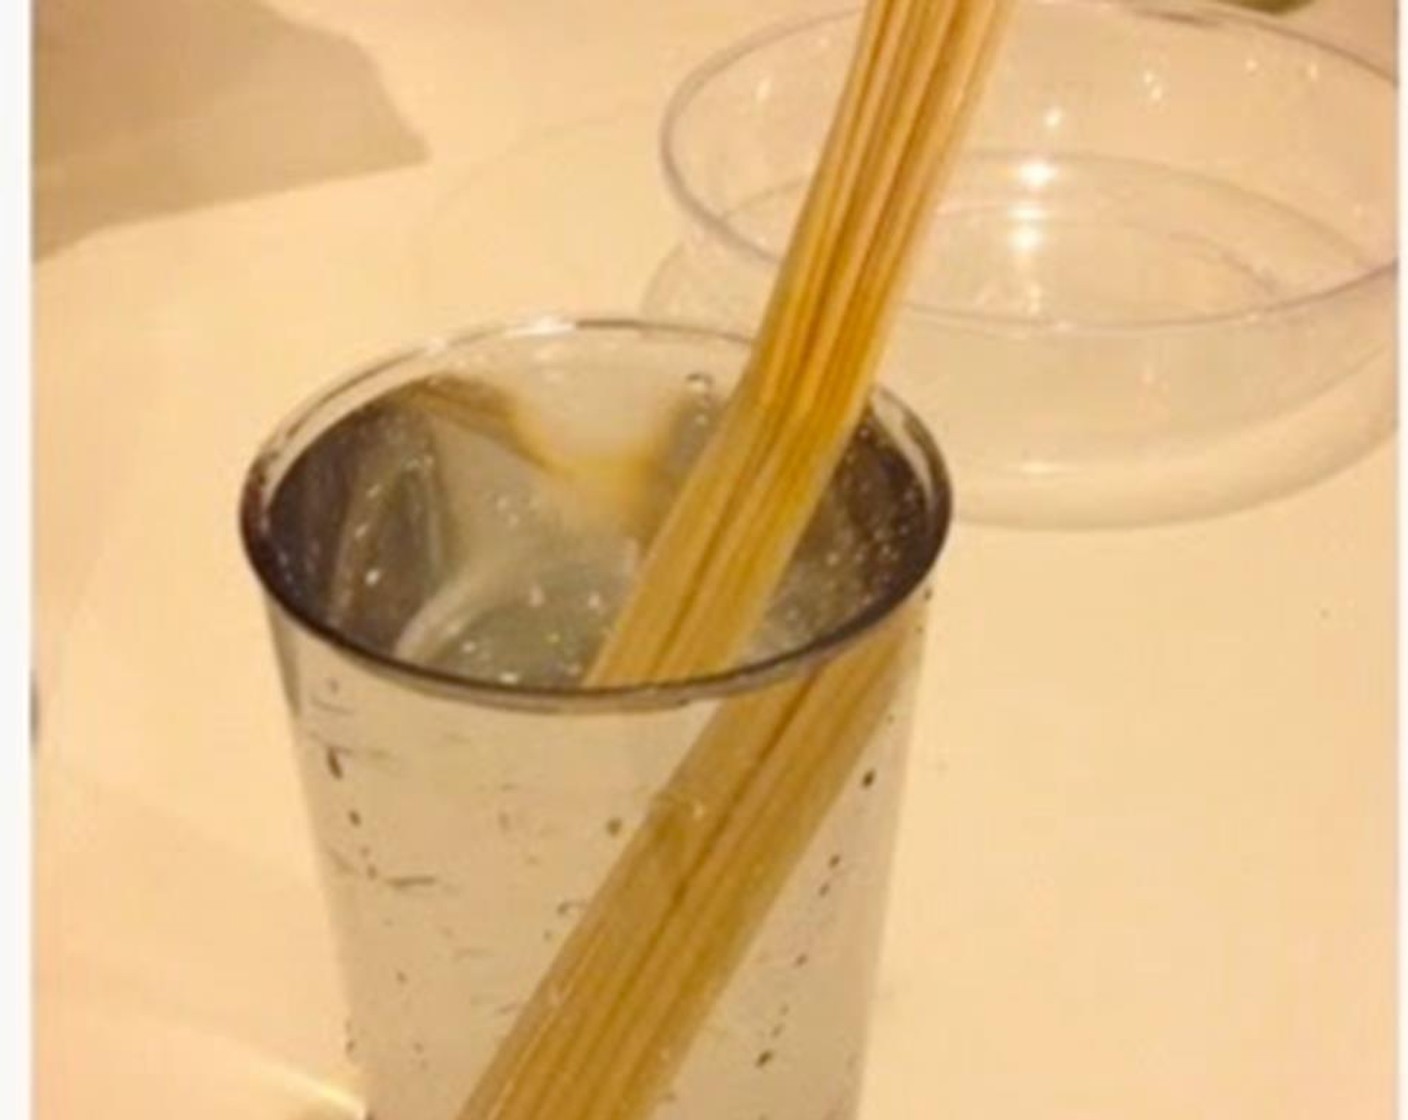 step 1 Soak some bamboo skewers in water for 30 minutes, and cook White Rice (to taste) according to package's instructions.